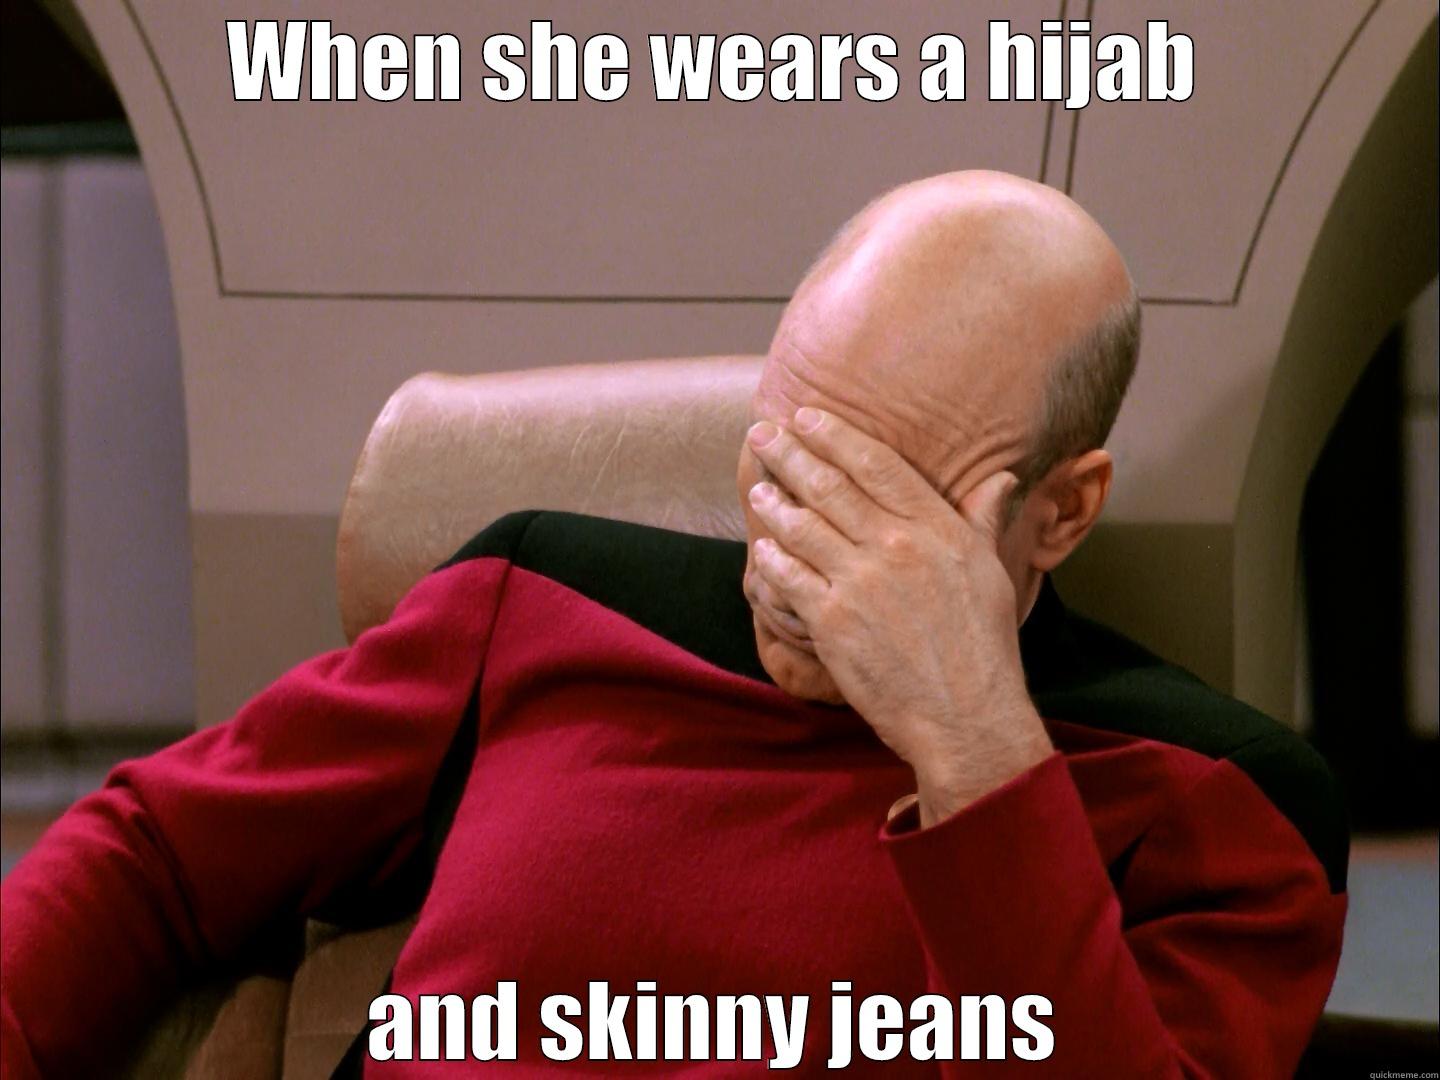 Muslim Meme - WHEN SHE WEARS A HIJAB AND SKINNY JEANS Misc